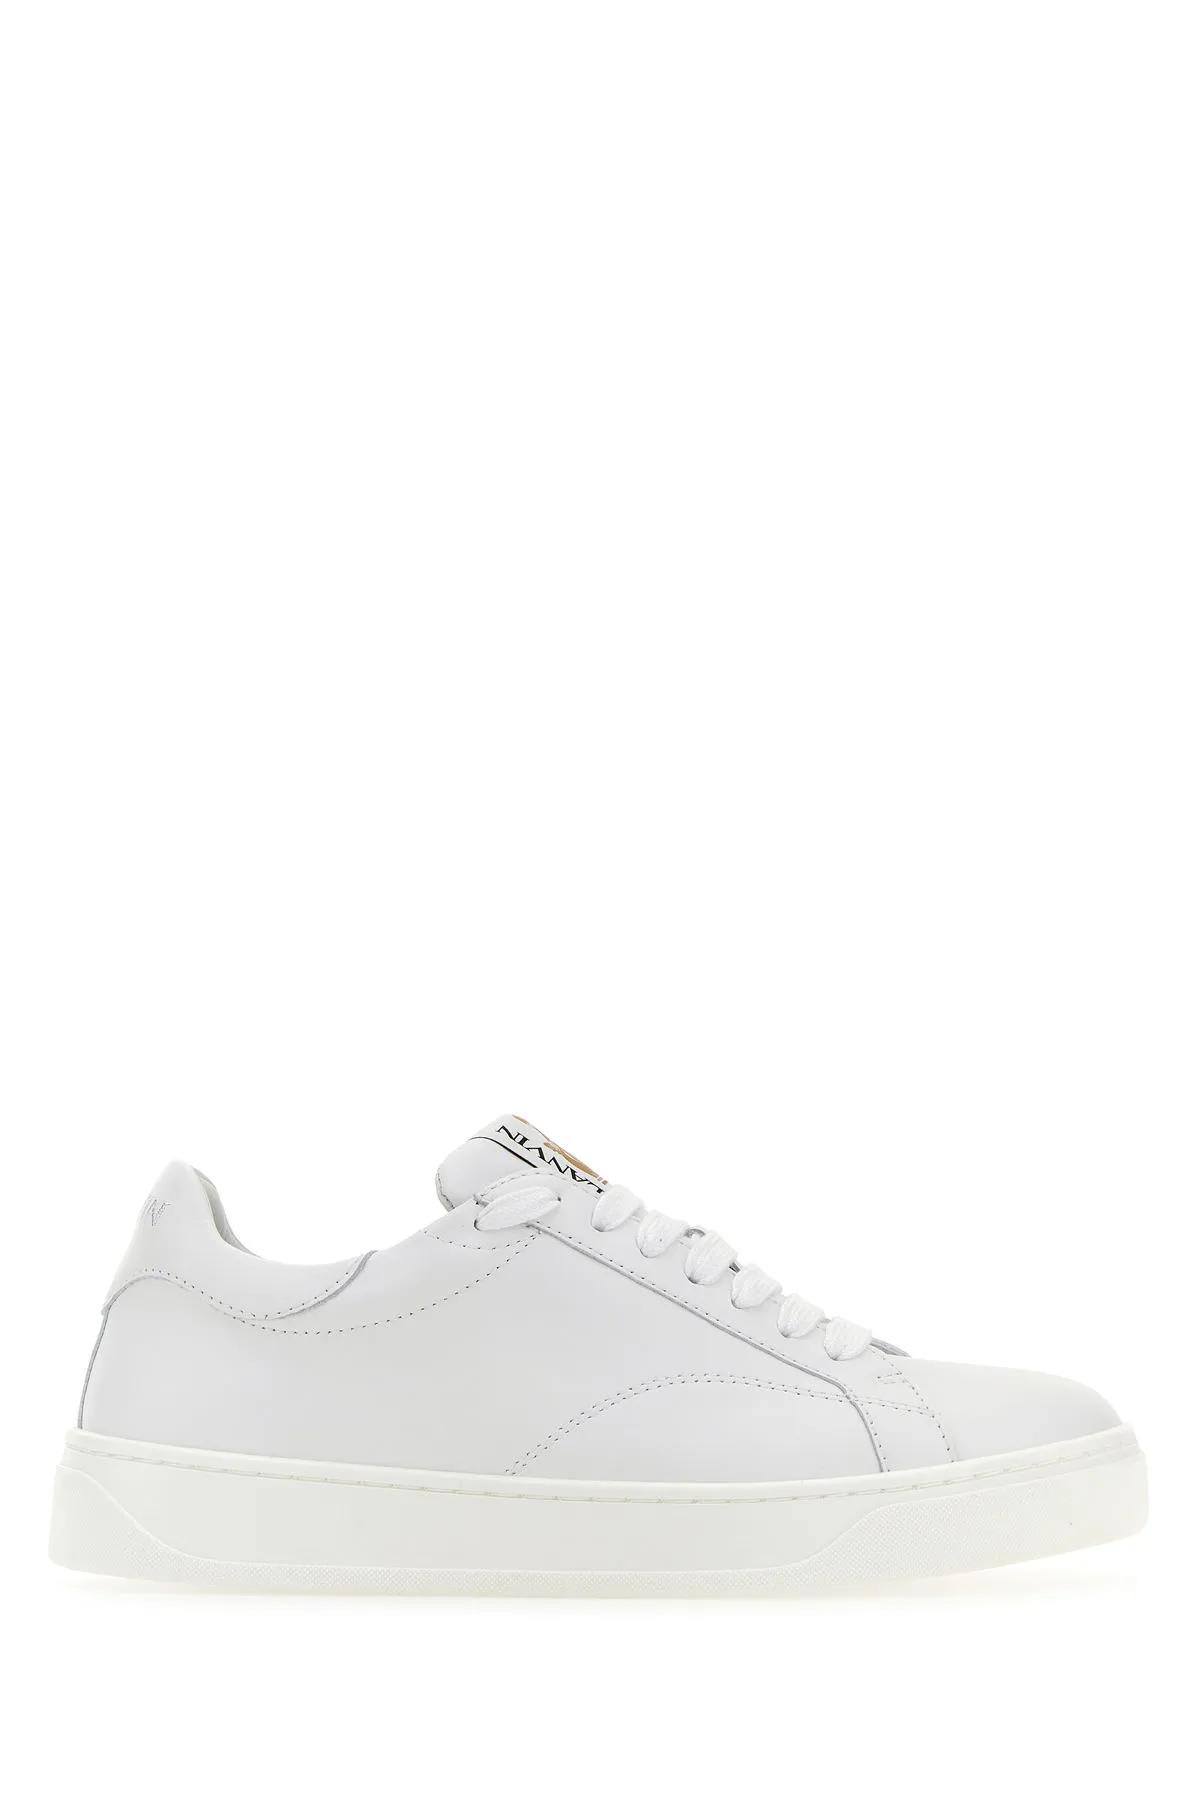 LANVIN WHITE LEATHER DDBO SNEAKERS